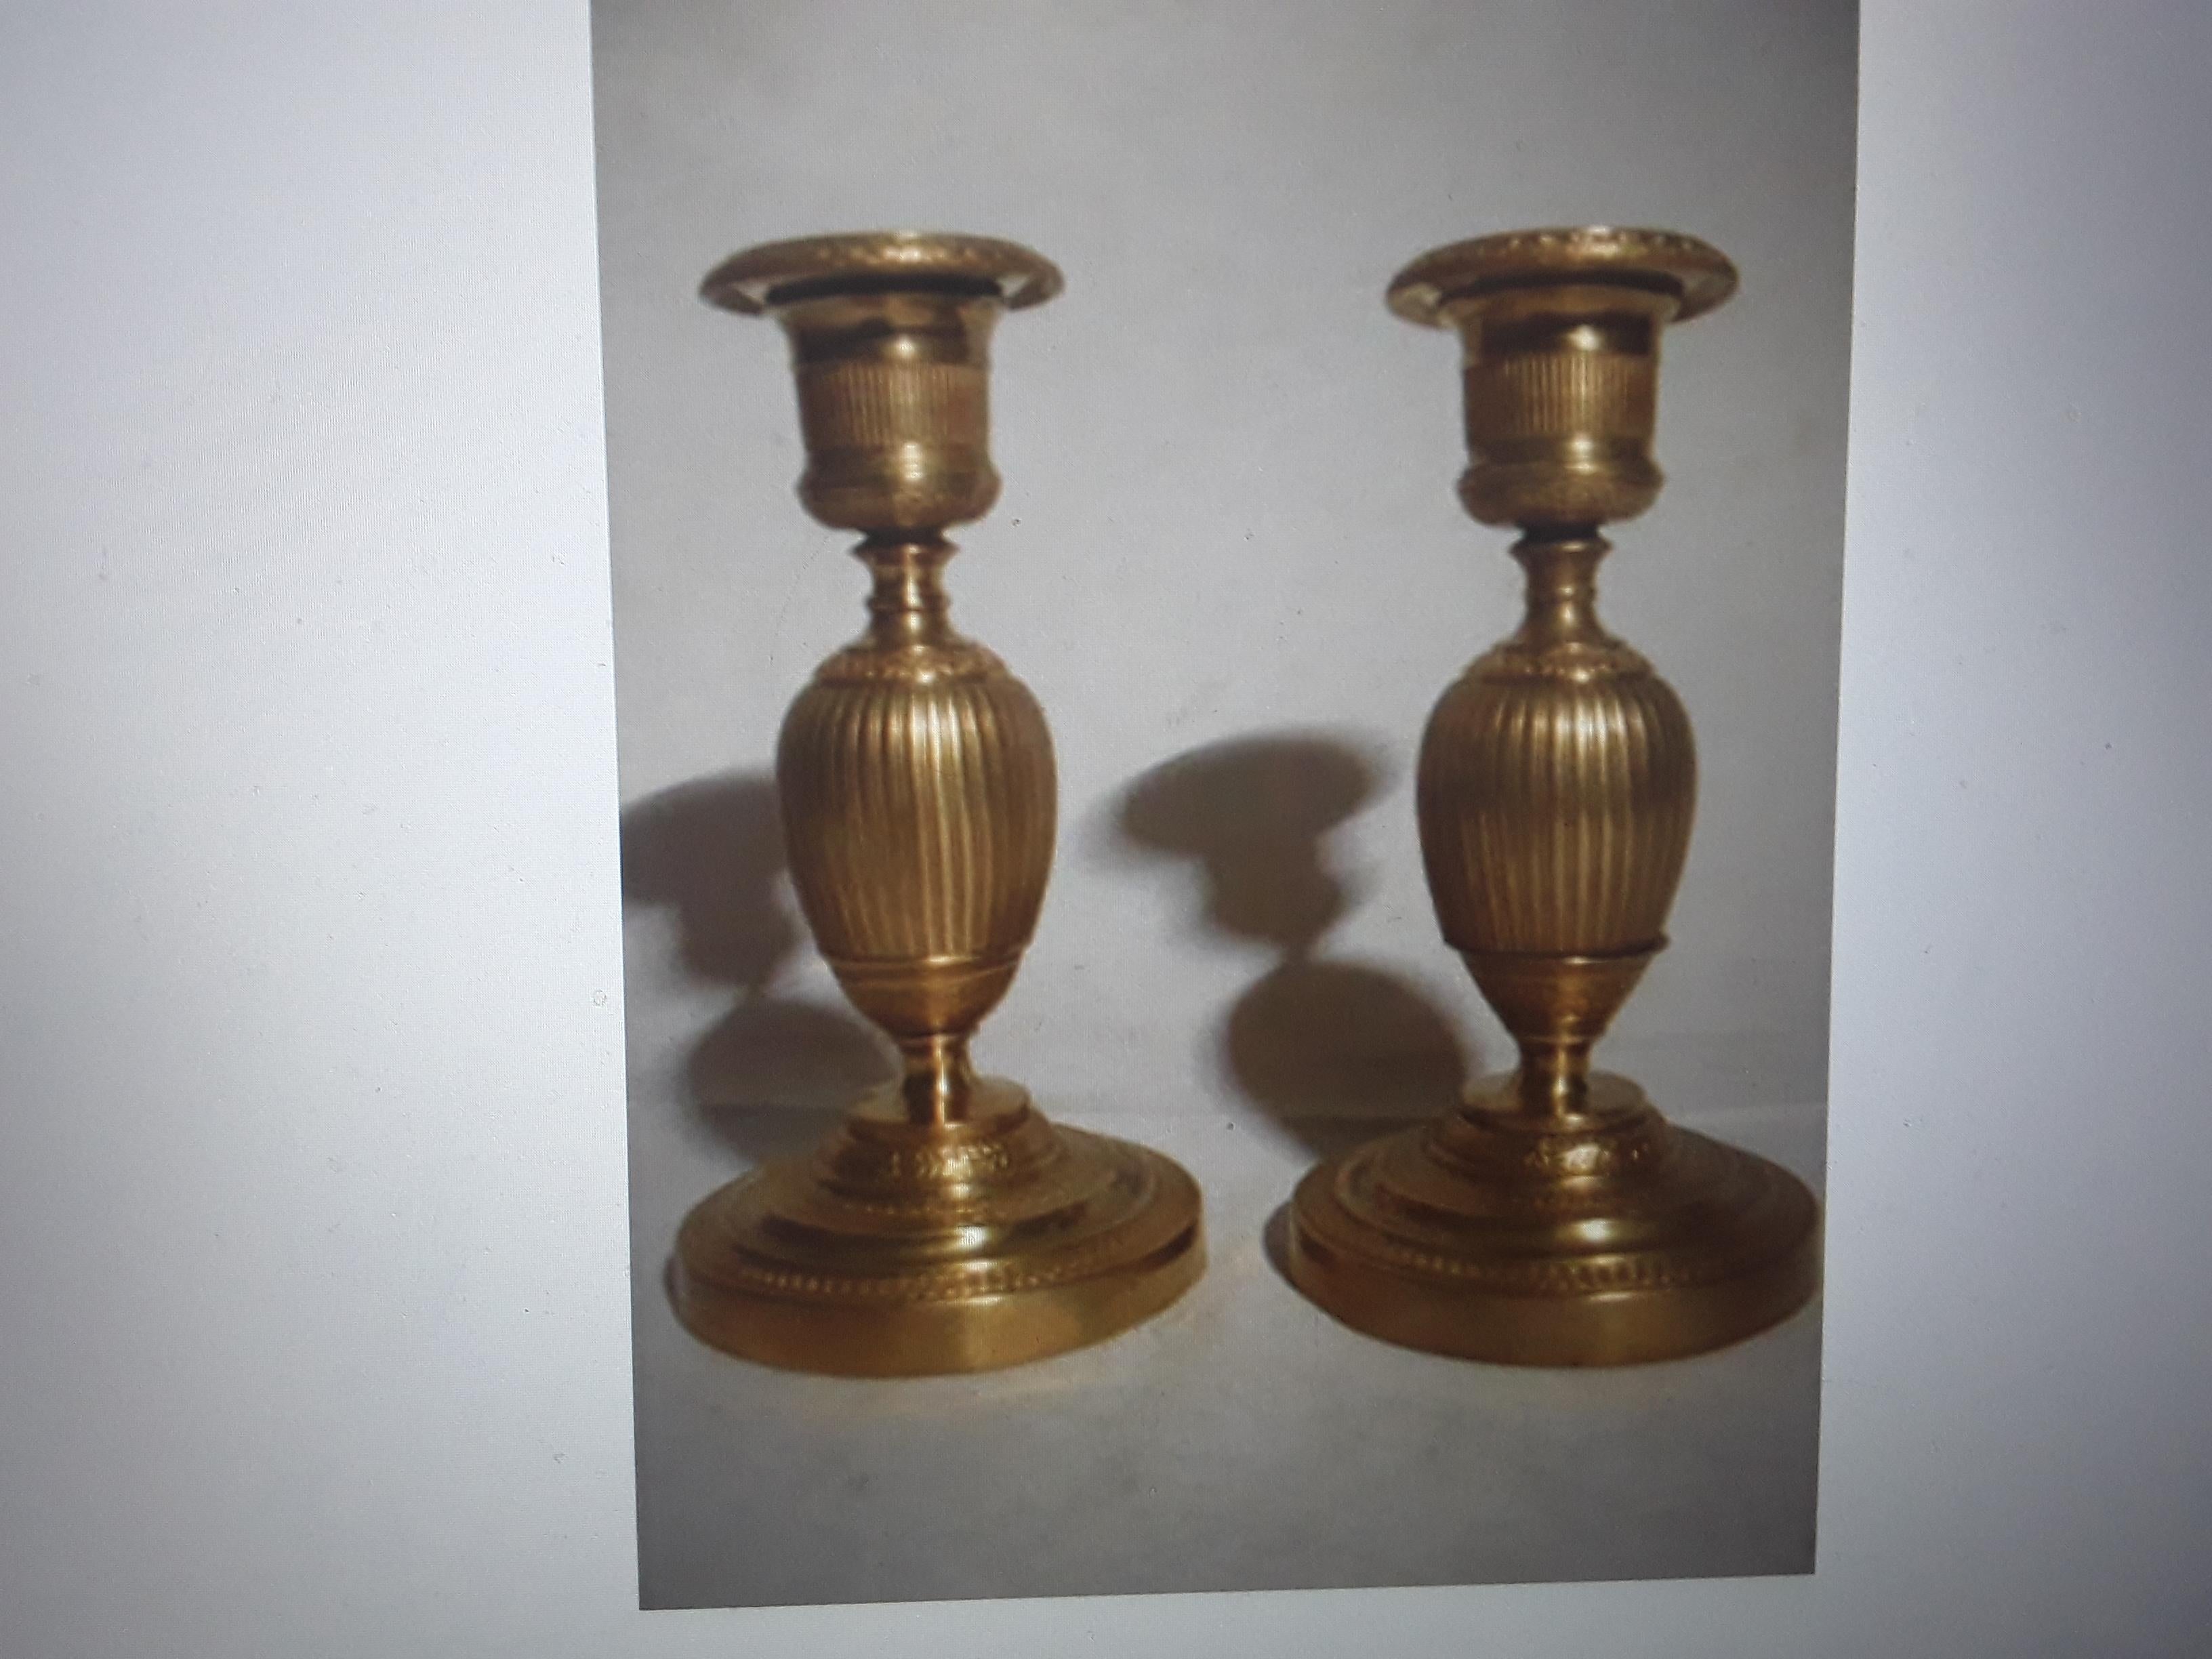 Pair c1810 French Empire Gilt Bronze Ovoid Form Candle Holders/ Candlesticks. Highly detailed antiquity.